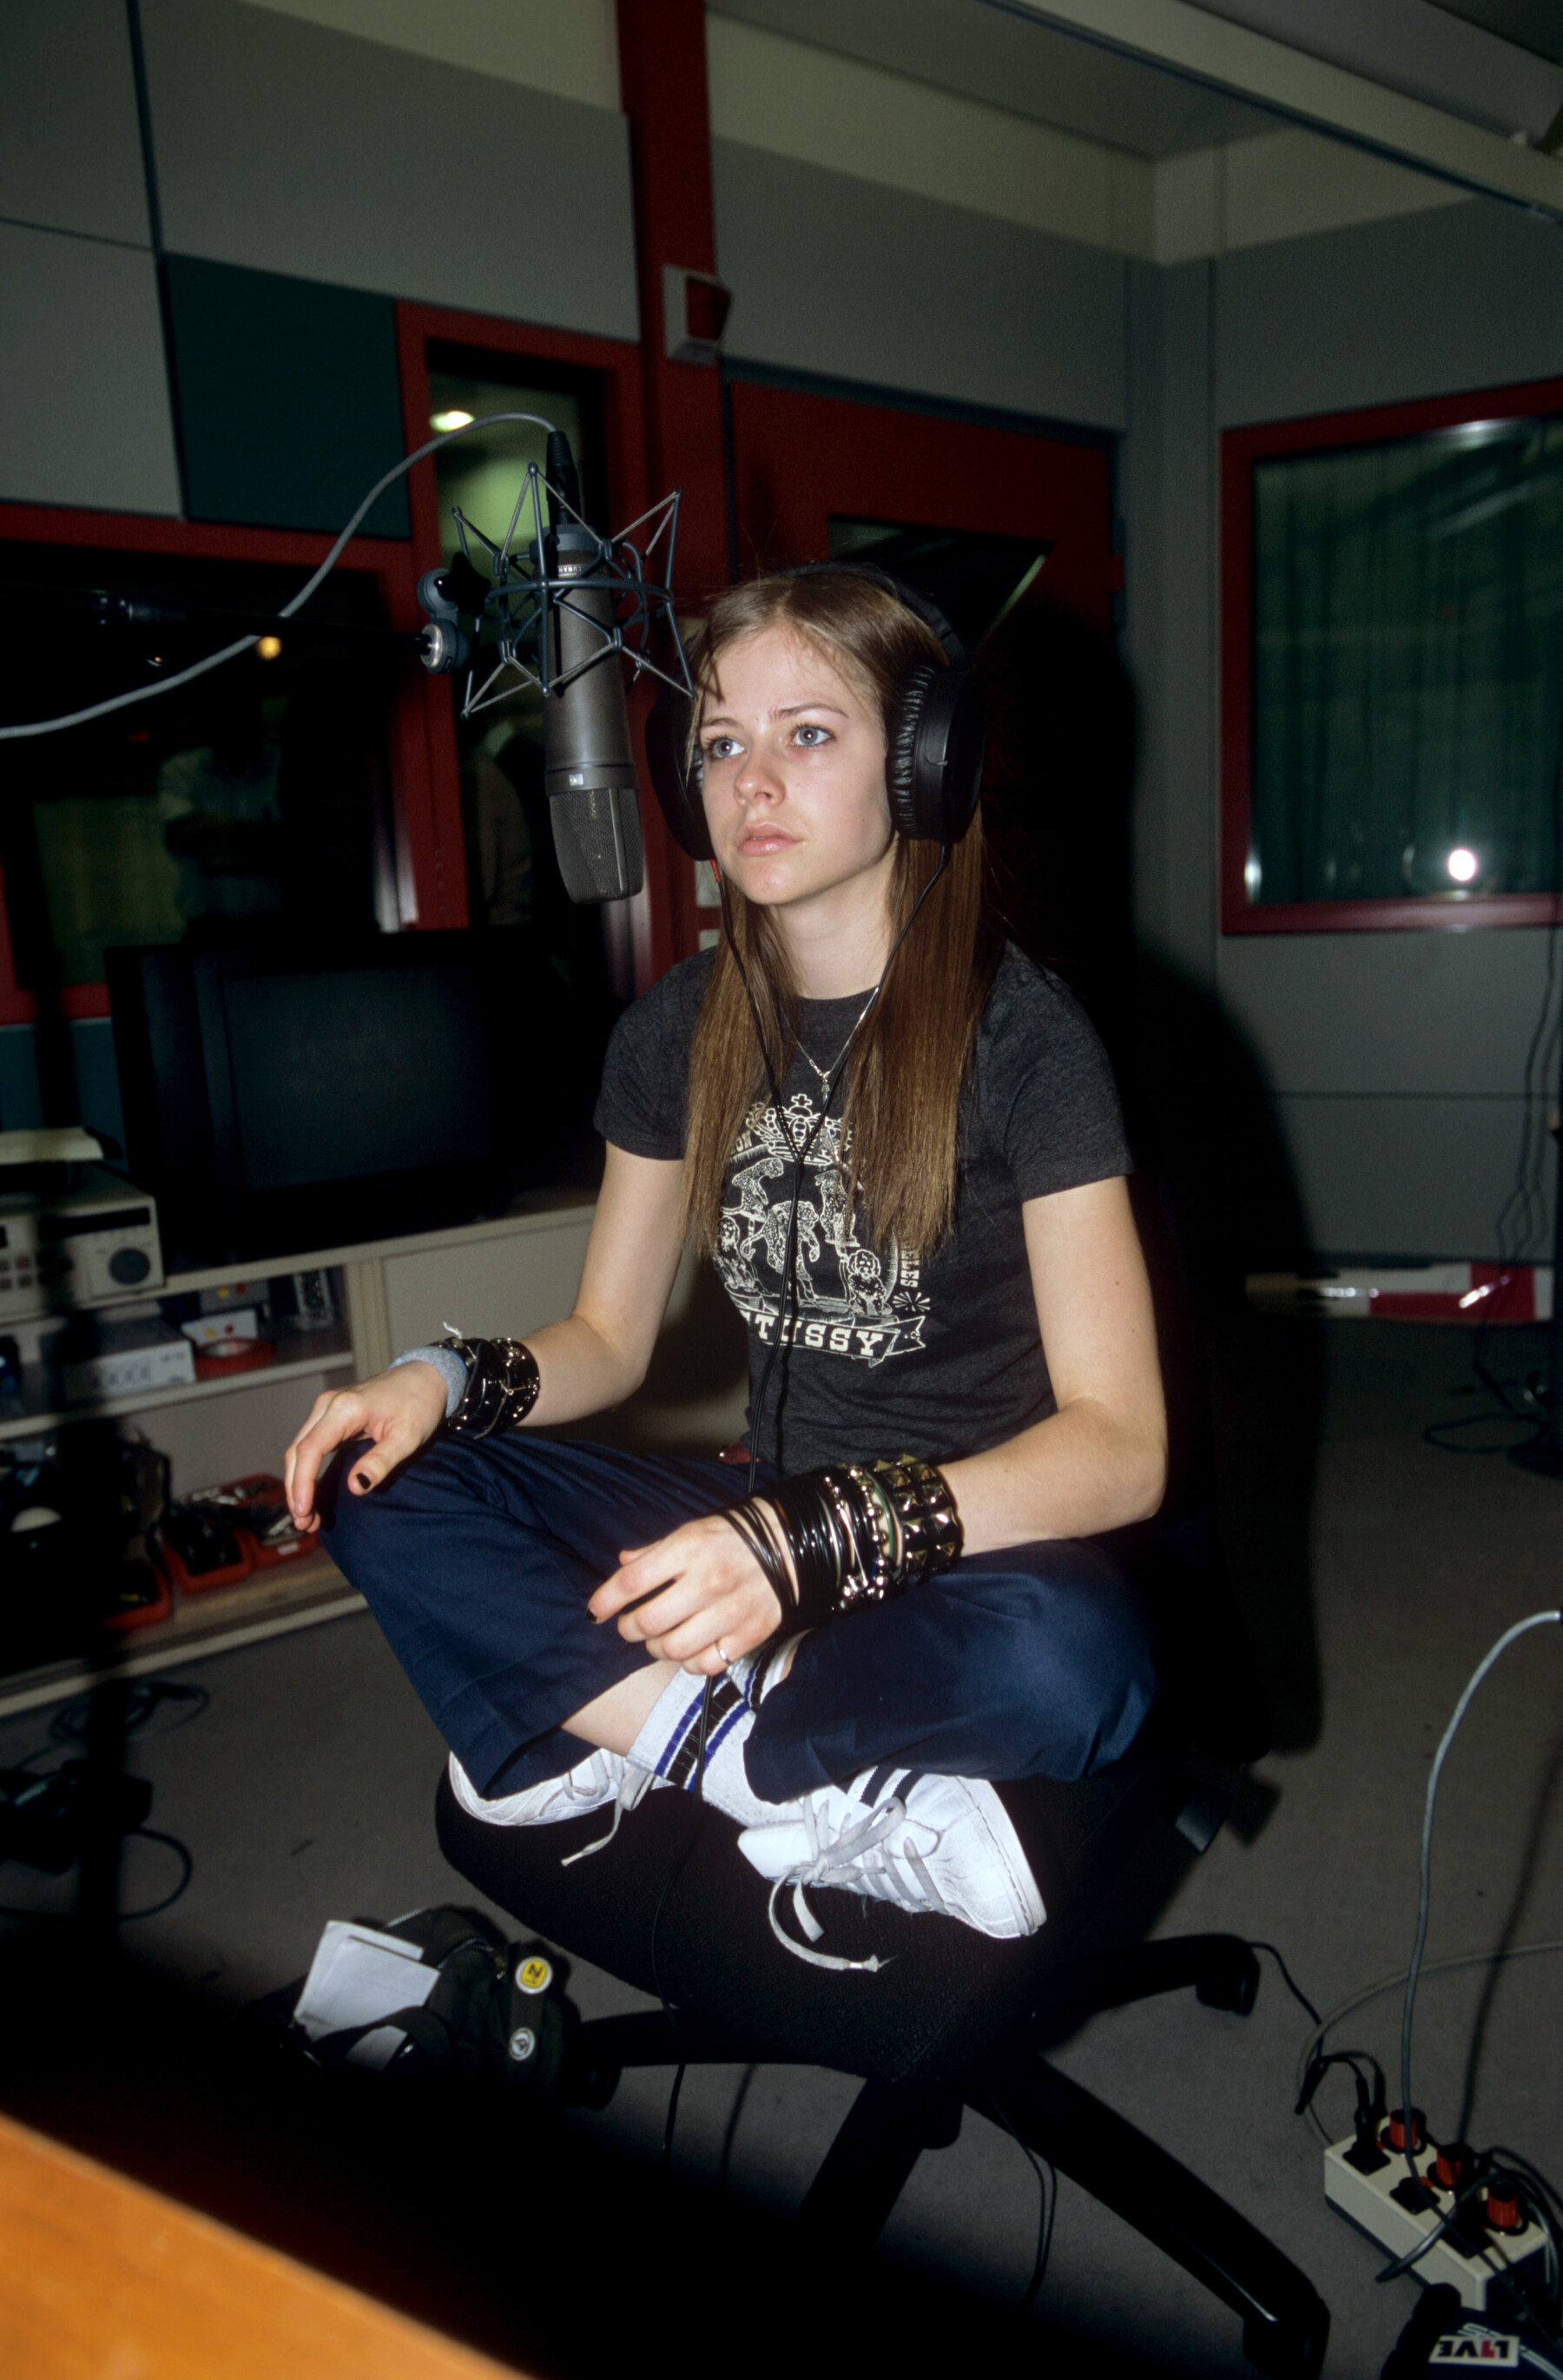 Avril Lavigne sits cross-legged on an office chair wearing headphones with a microphone in front of her face.